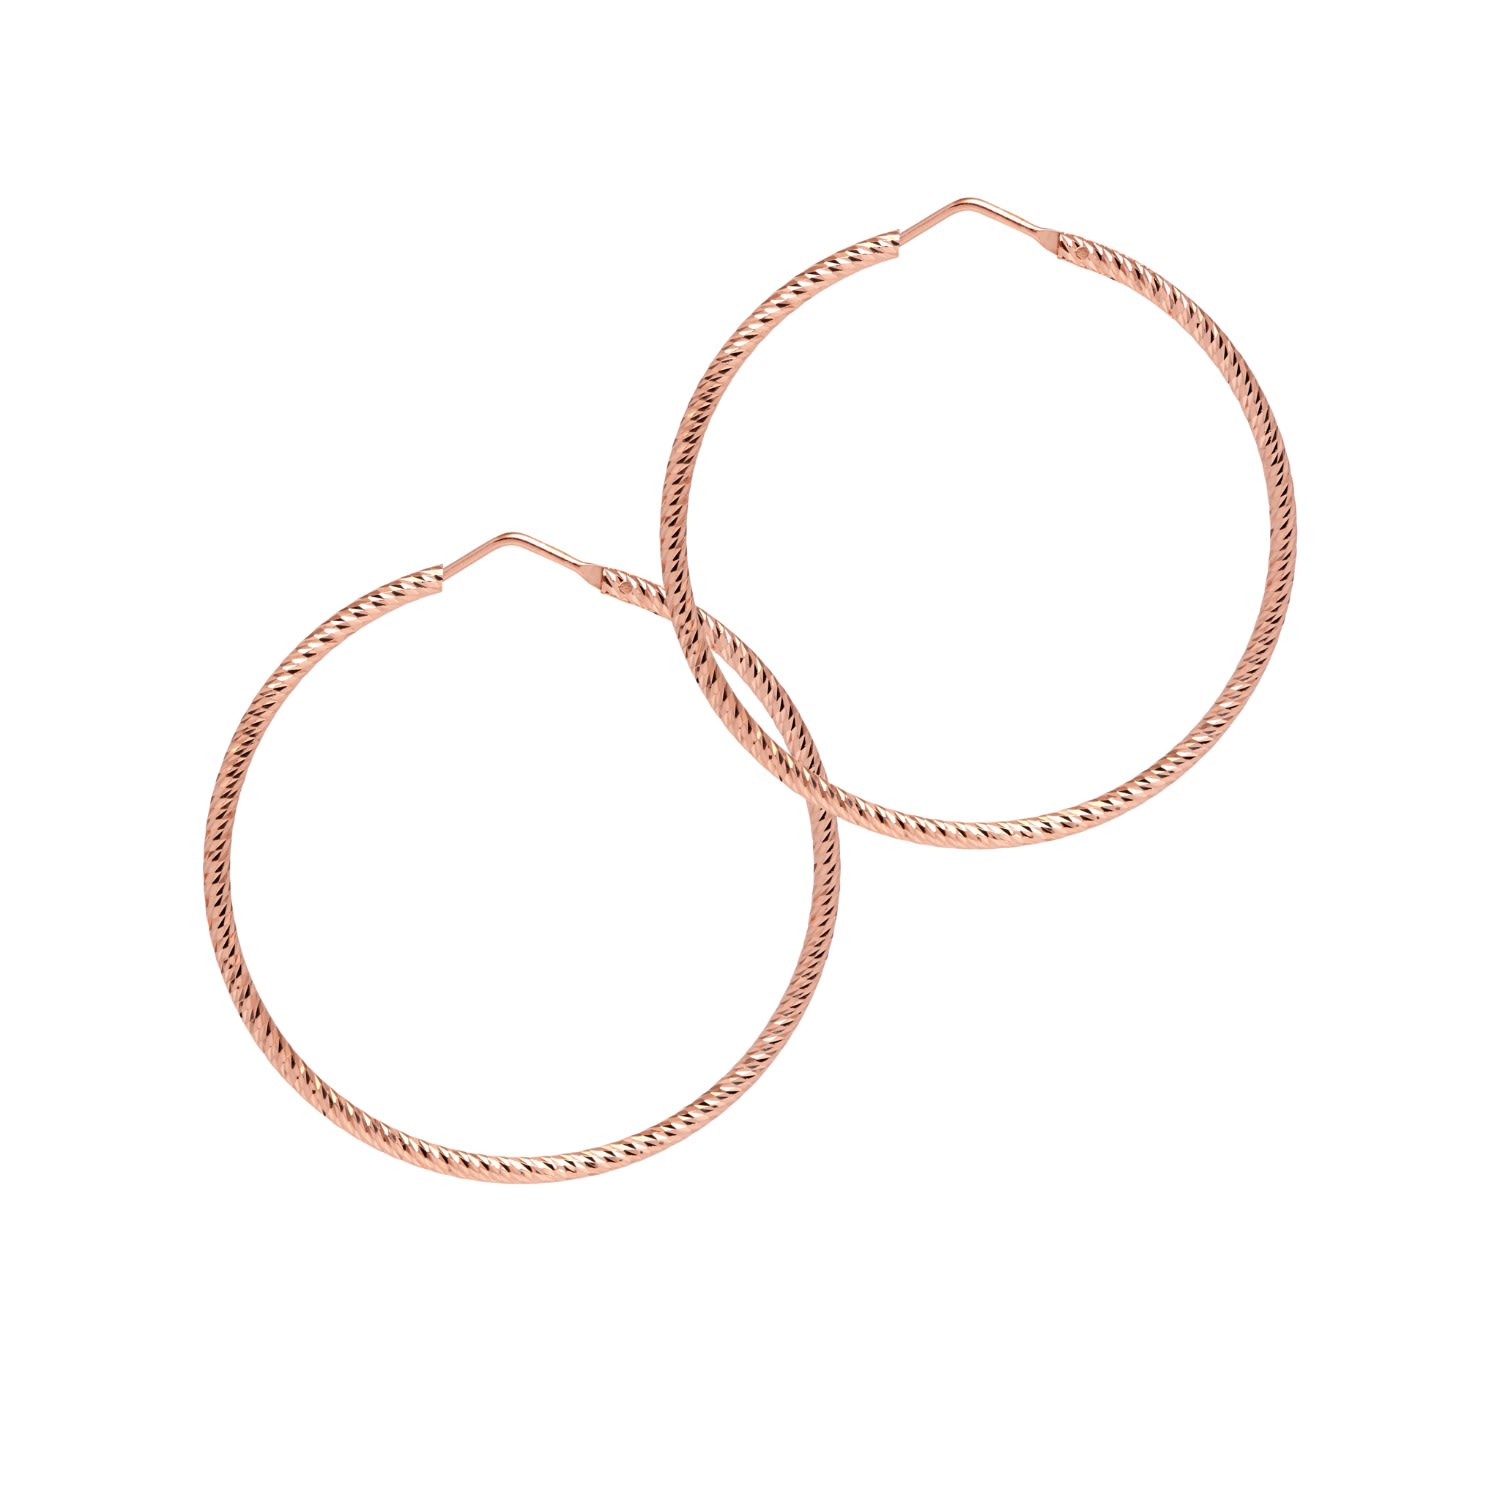 The Hoop Station Women's Sparkly Hoops Medium - Rose Gold